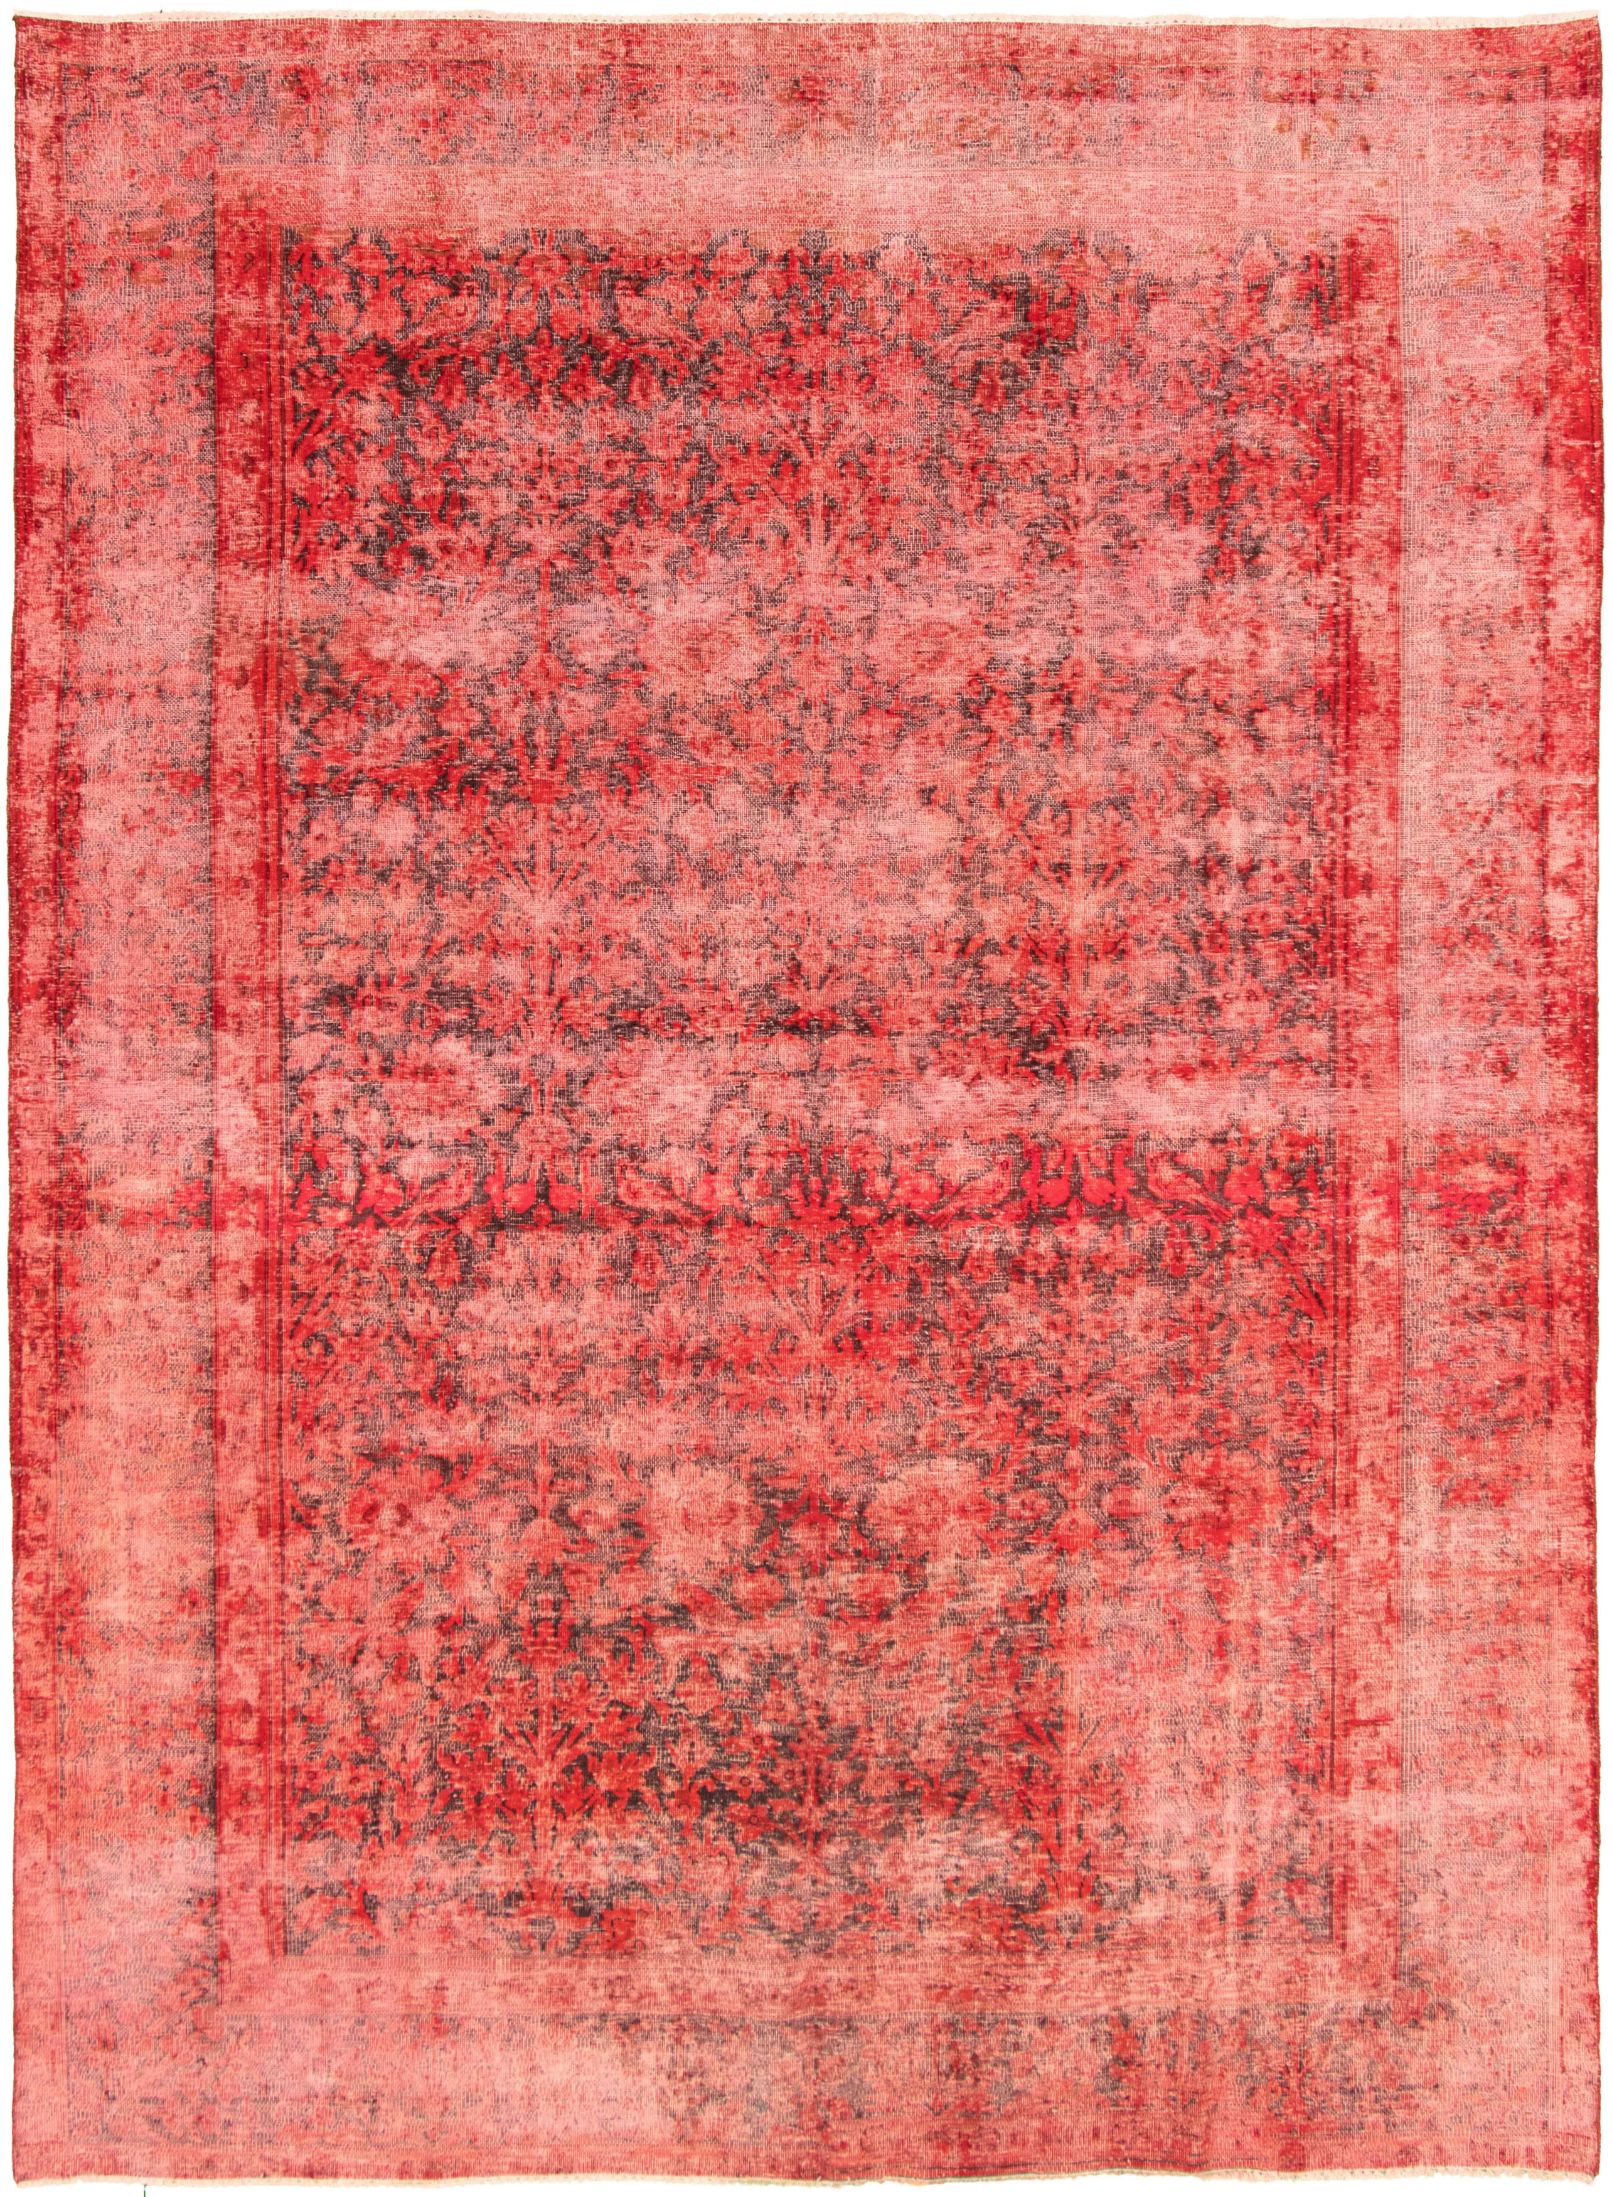 Hand-knotted Color Transition Red Wool Rug 8'7" x 11'7" Size: 8'7" x 11'7"  